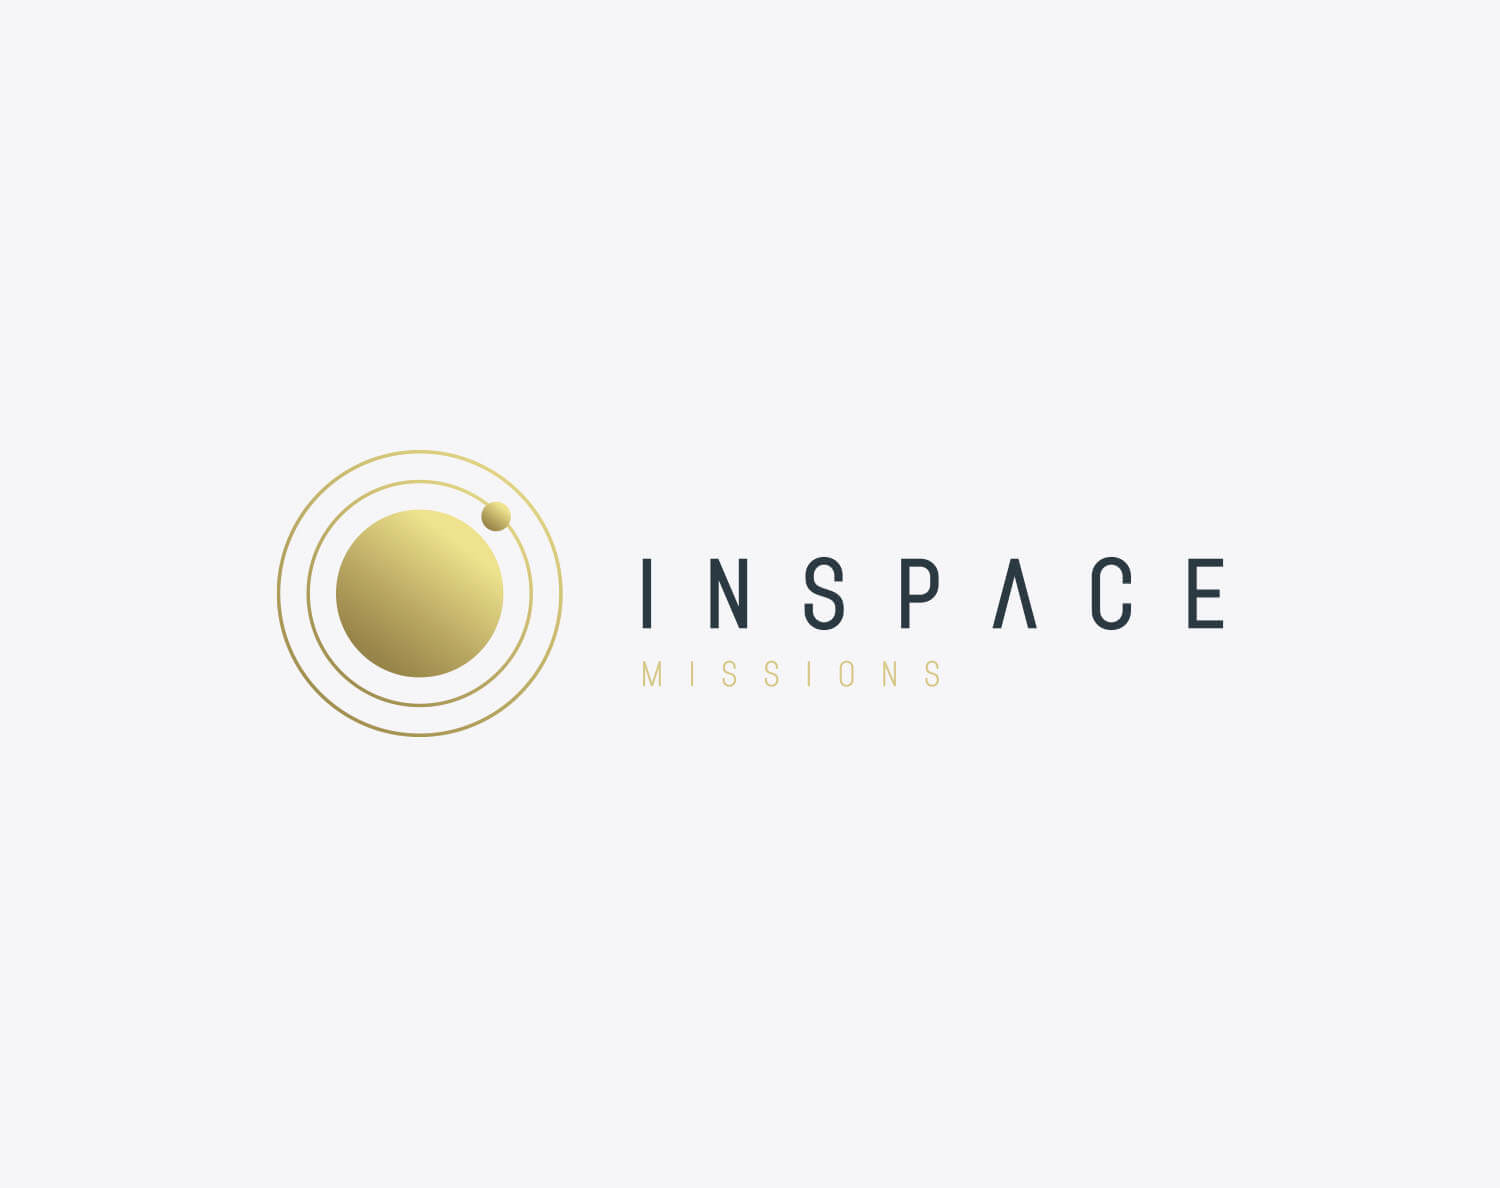 In-Space Missions Logo in horizontal format - Brand identity/logo design for In-Space Missions